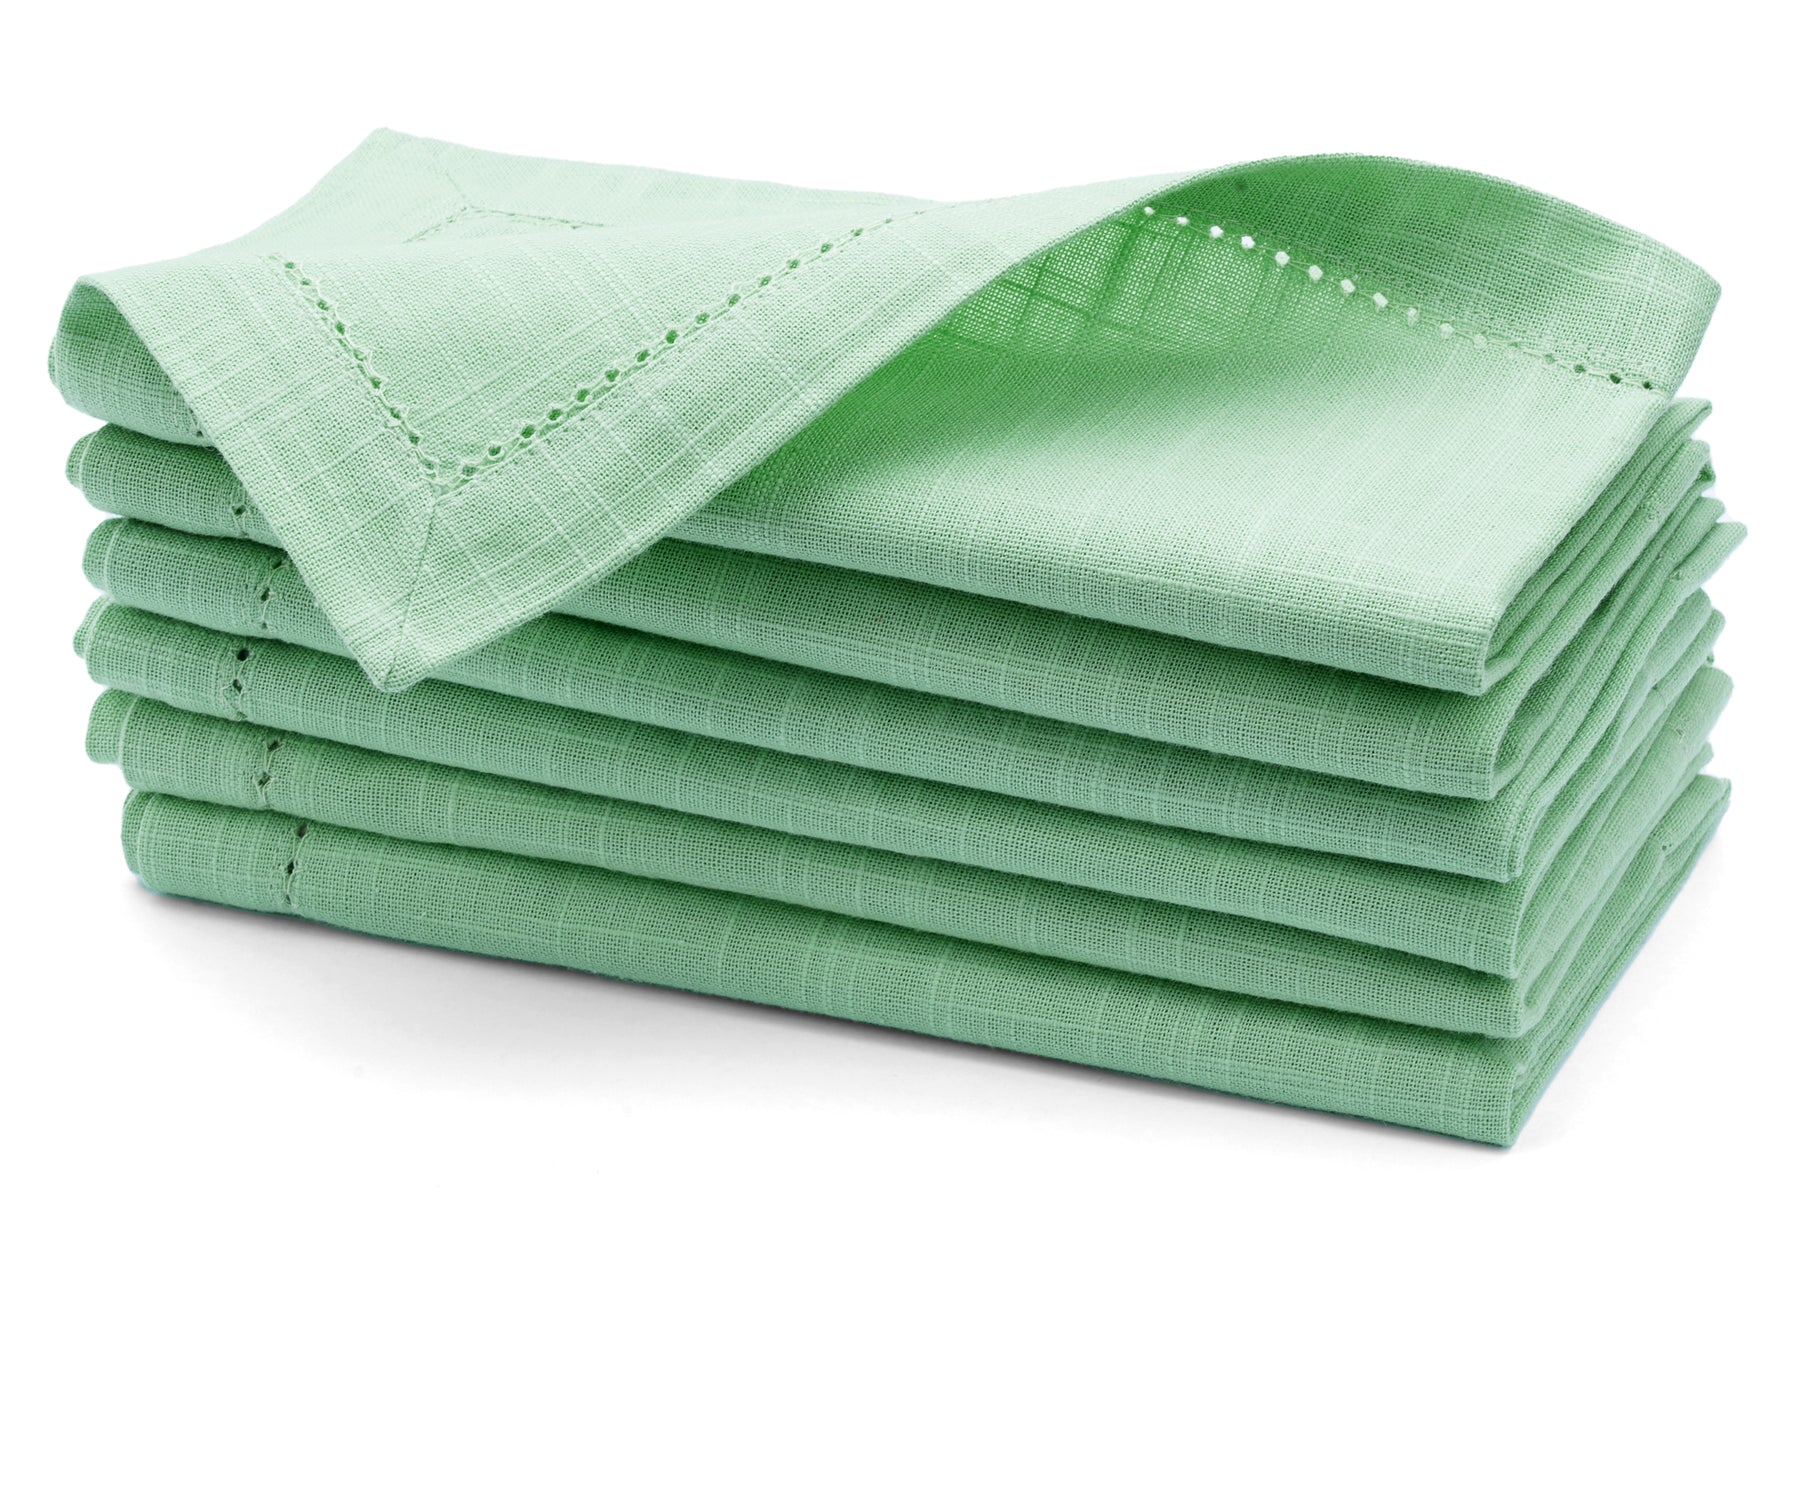 cloth napkins are woven with cotton. cotton dinenr napkisn measures size of 18x18